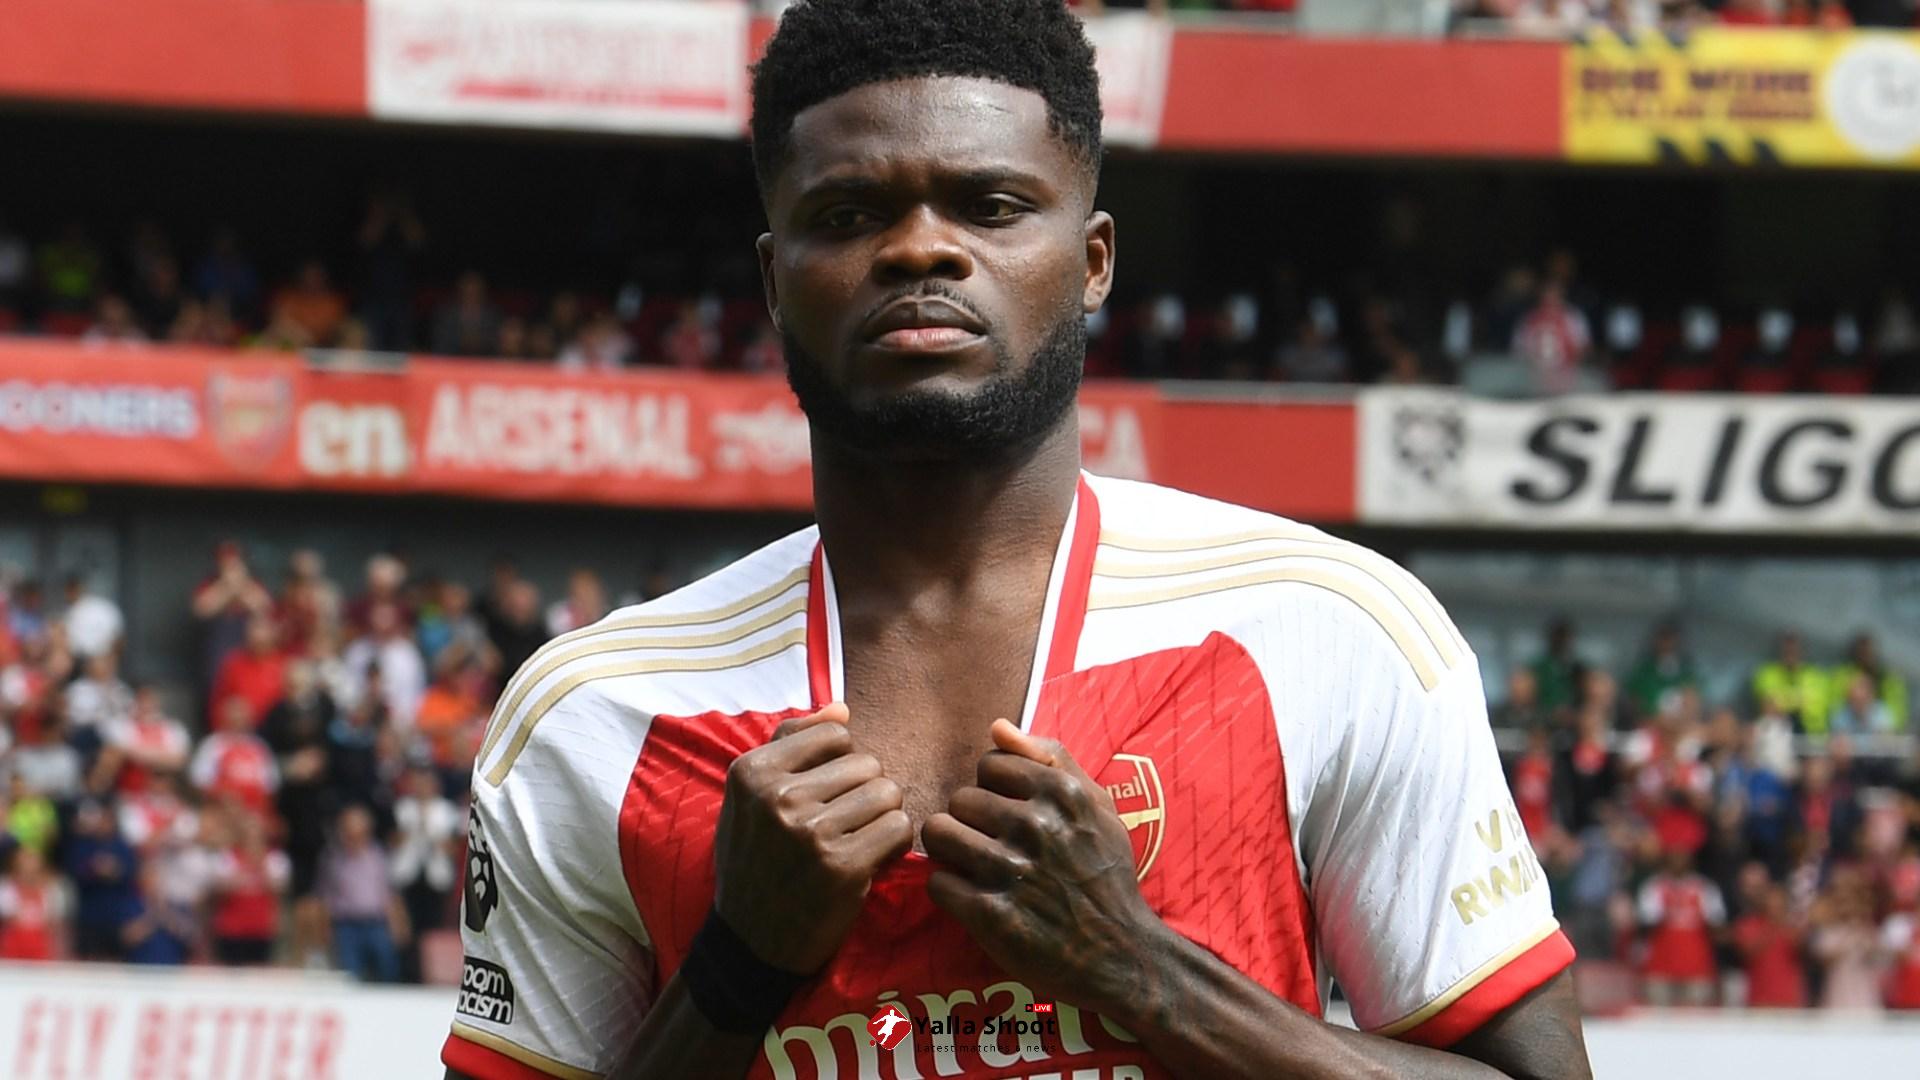 Thomas Partey 'set to leave Arsenal at the end of the season' as £45million signing fails to shake injury woes